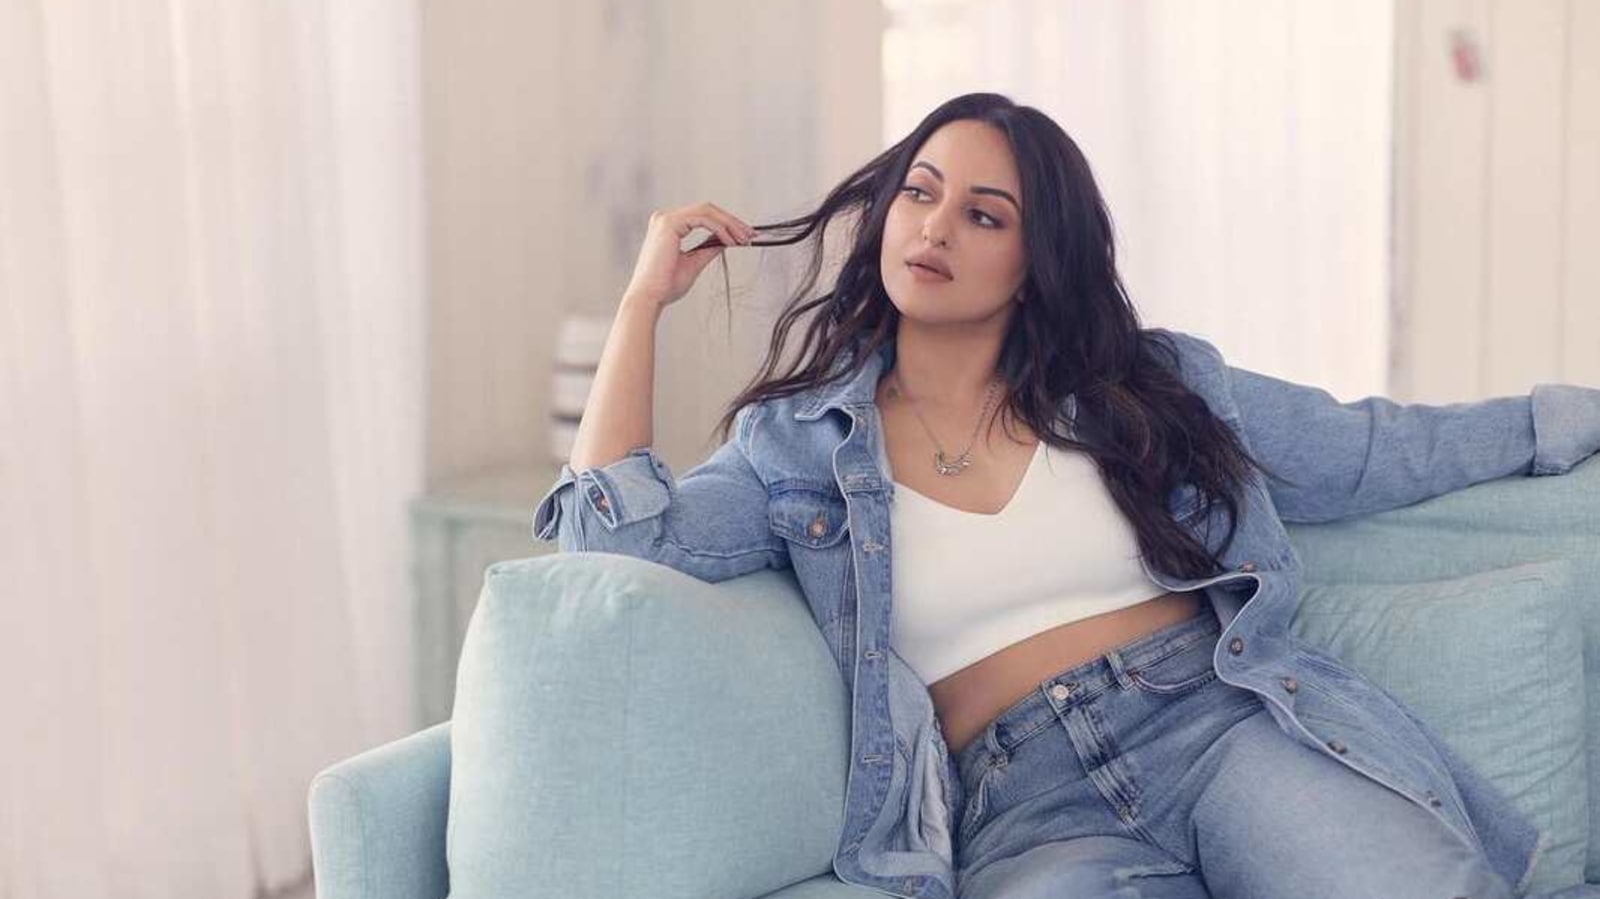 Sonakshi Sinha buys 4BHK home in Bandra: 'It was my dream to buy a house  with my hard earned money' | Bollywood - Hindustan Times